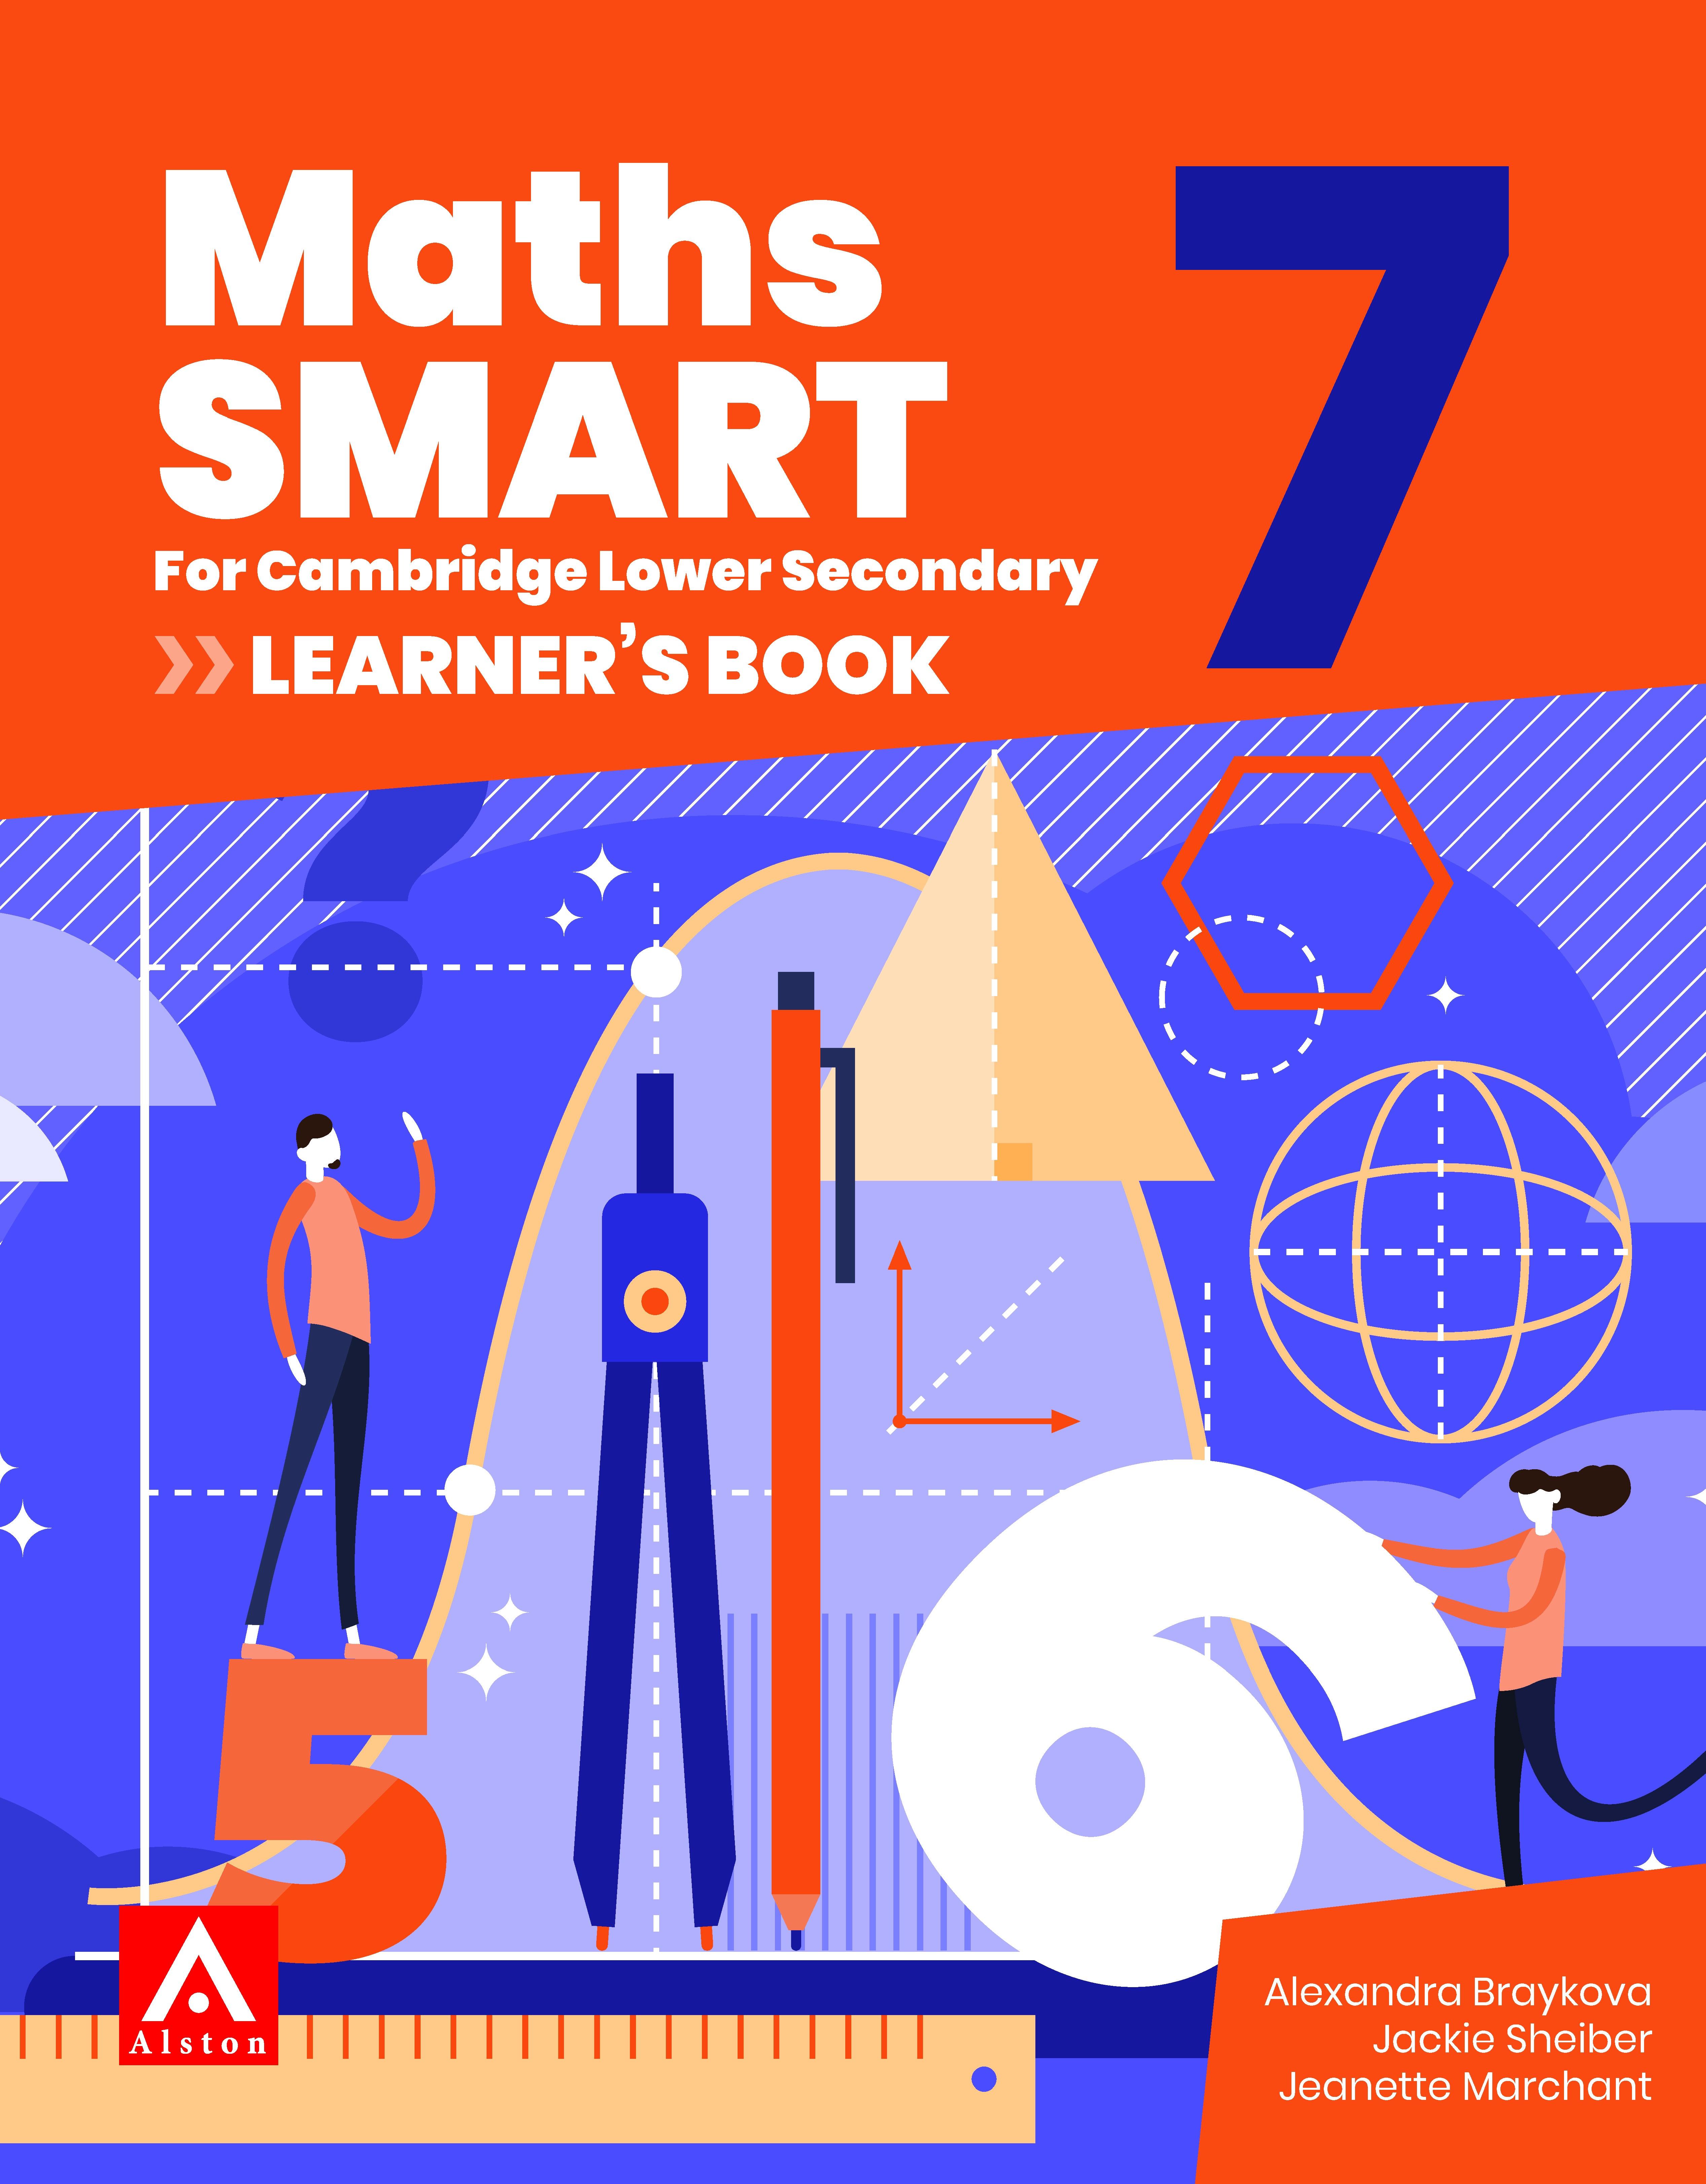 Maths SMART For Cambridge Lower Secondary